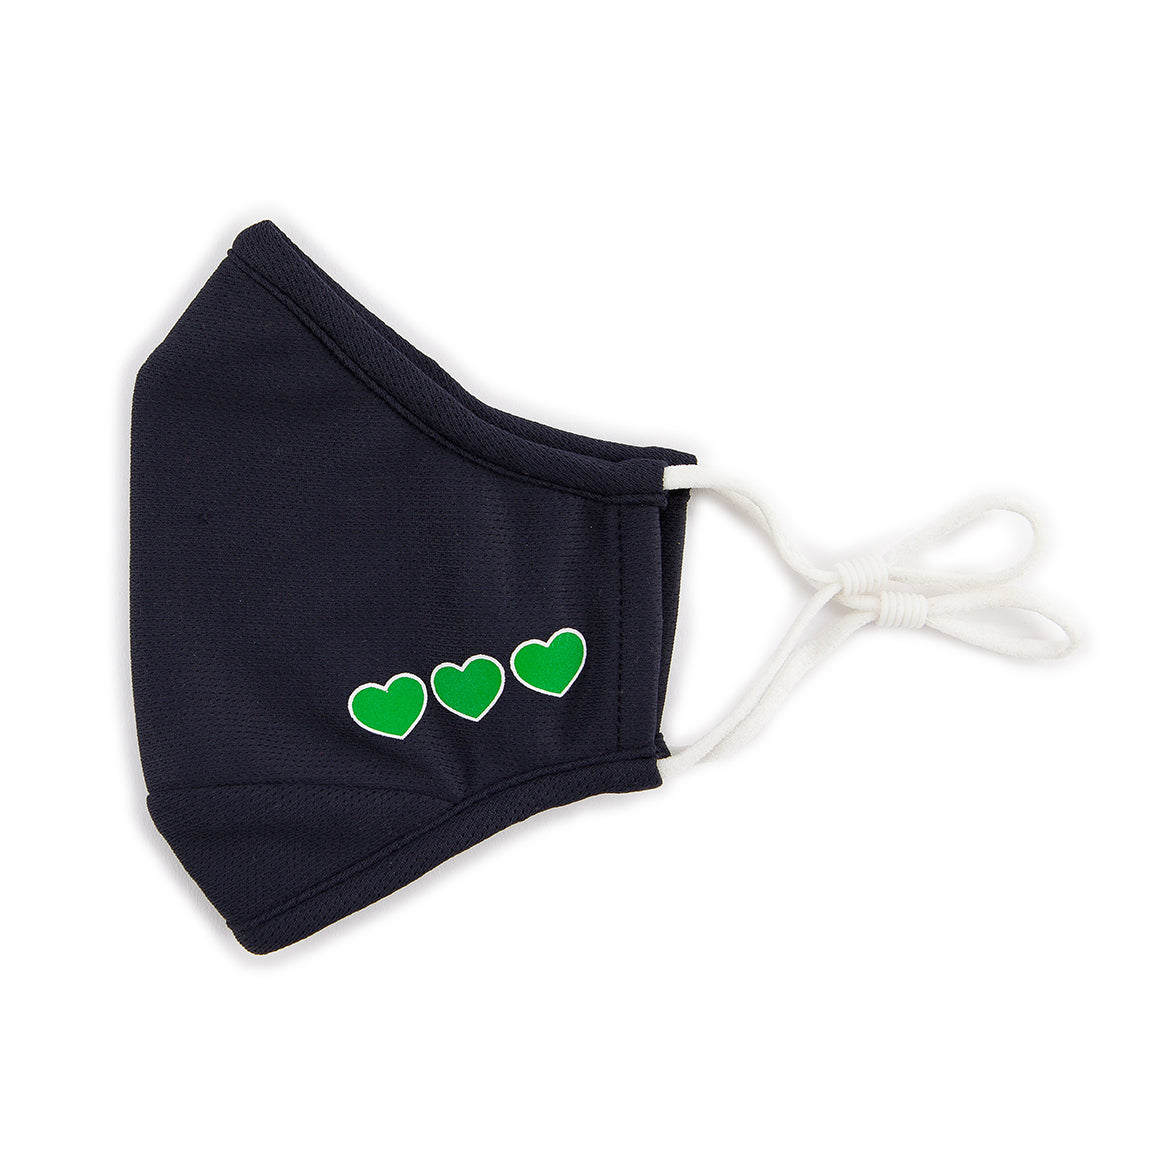 Navy face mask with green hearts printed on one side